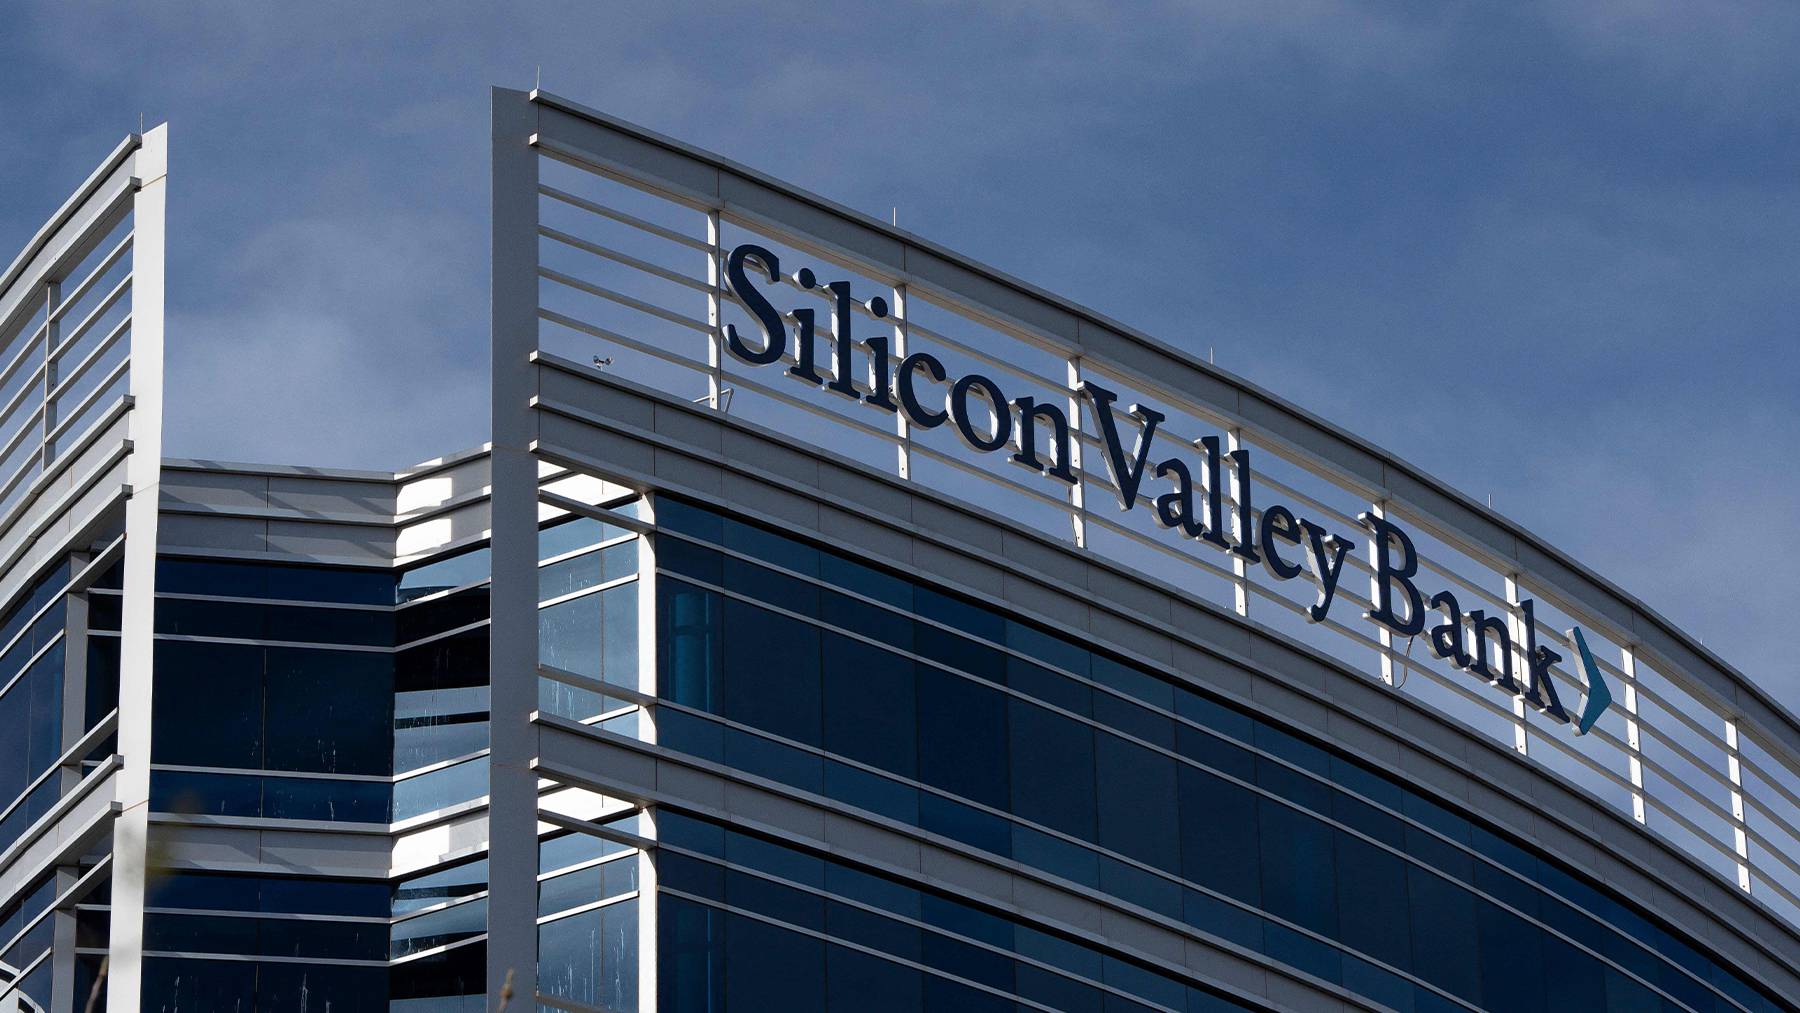 At the end of last week, most people across the globe received their first introduction to Silicon Valley Bank when US regulators took it over after it faced a run on deposits.